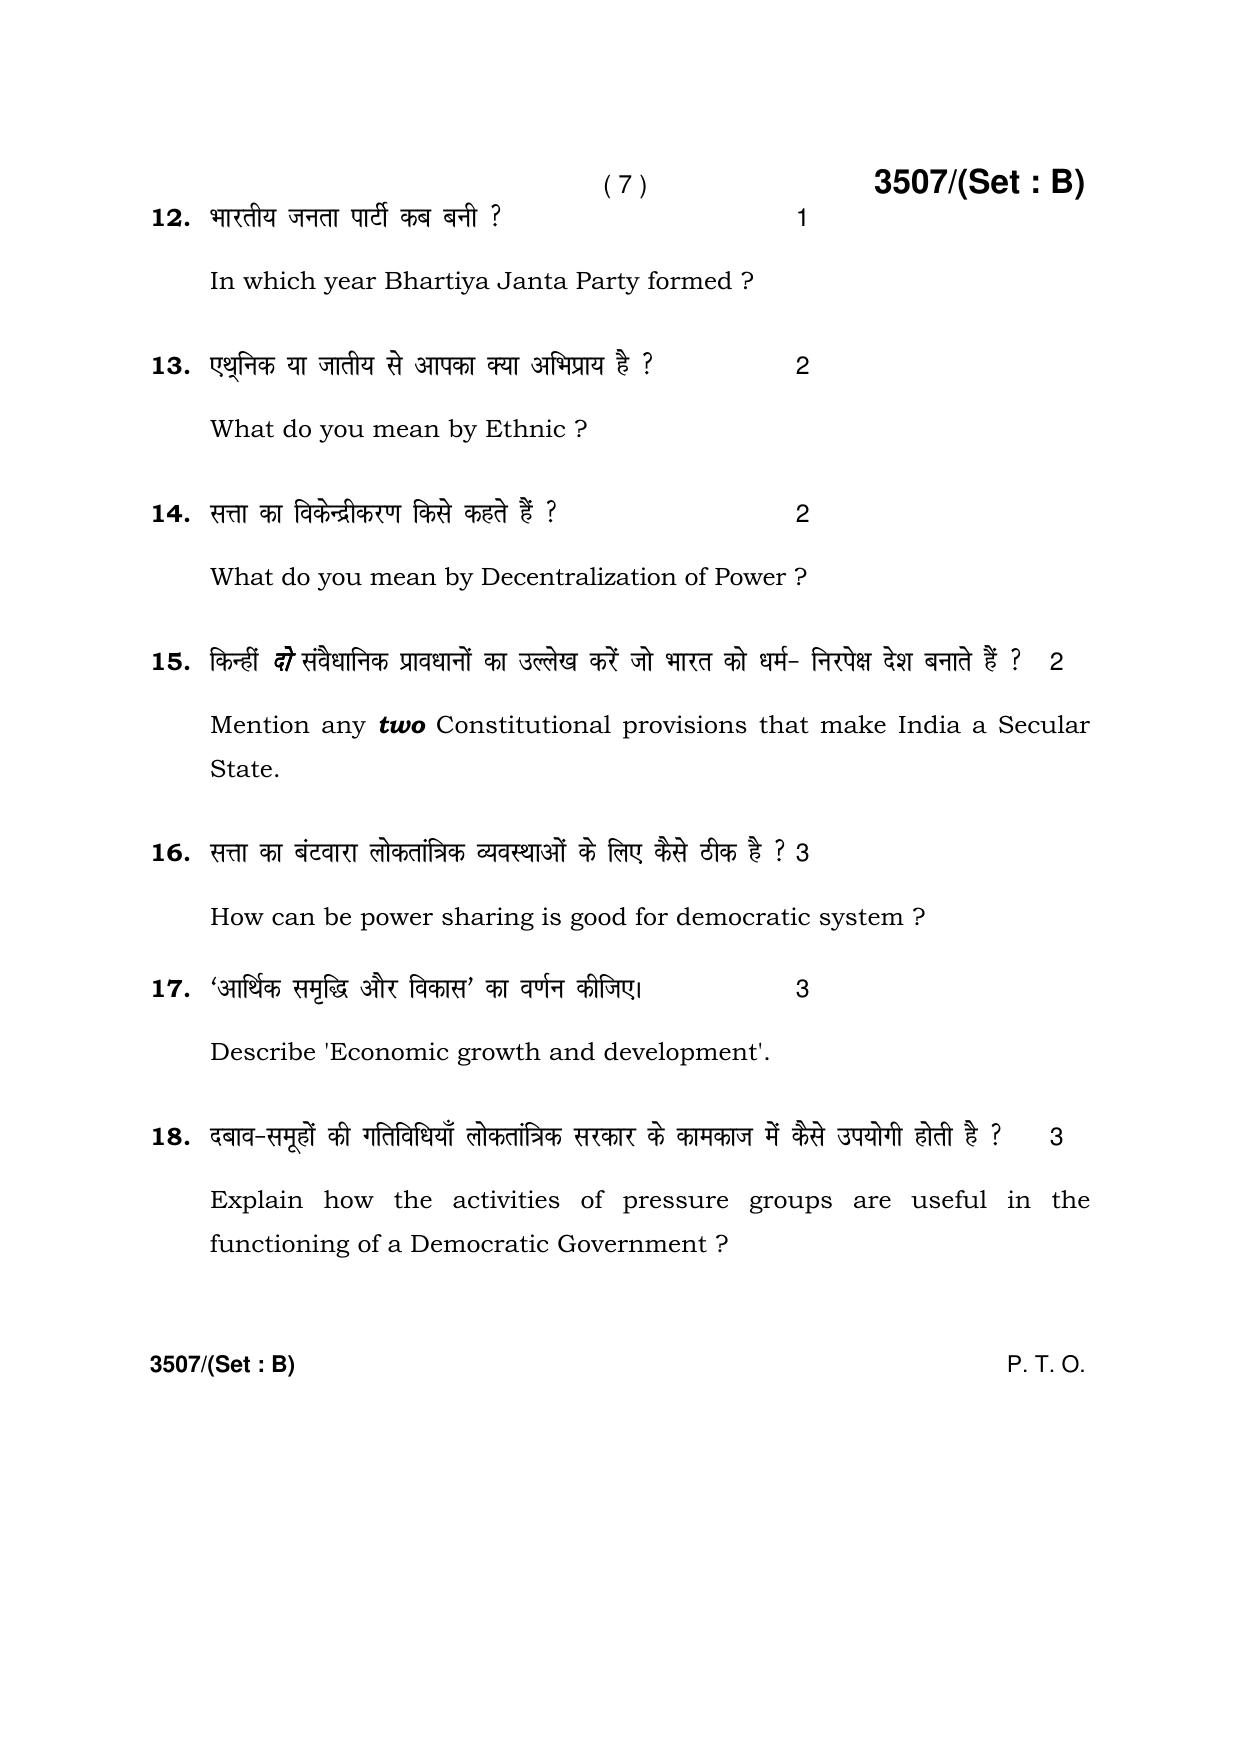 Haryana Board HBSE Class 10 Social Science -B 2018 Question Paper - Page 7